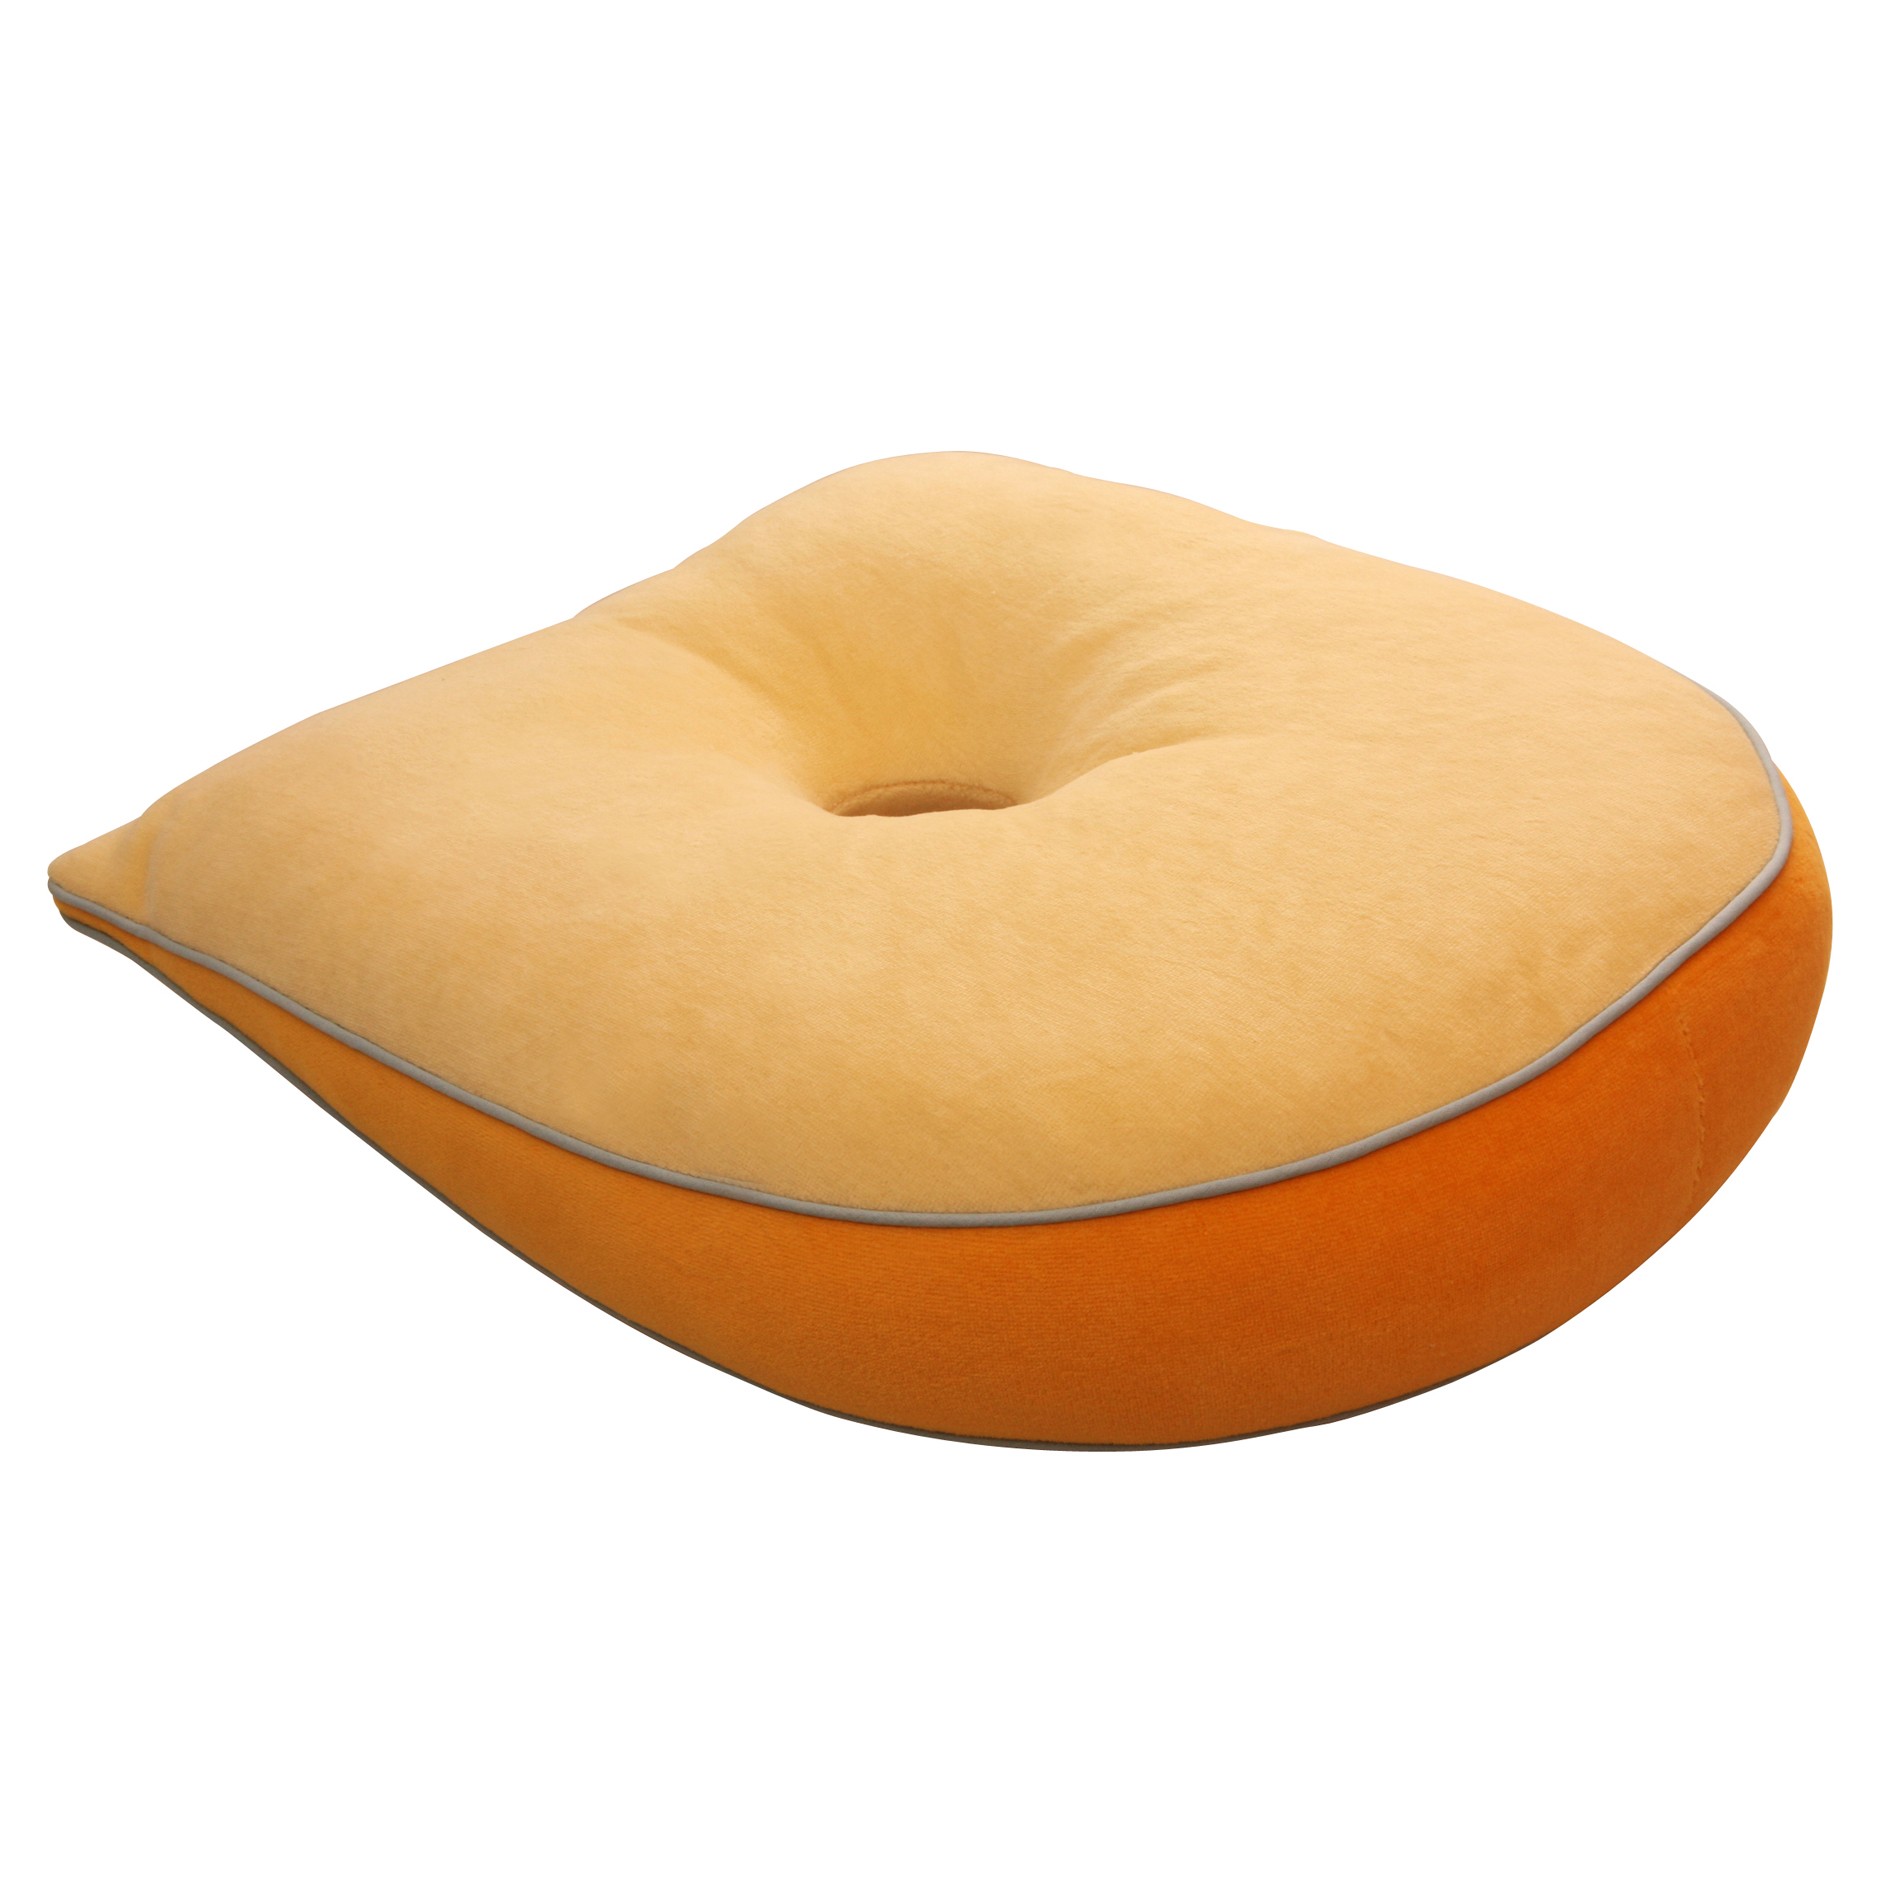 Special Reading Pillow & Seat Wedge Cushion - Tilt Cushion,  Lazy Cushion reading cushion, seat cushion, lazy cushion